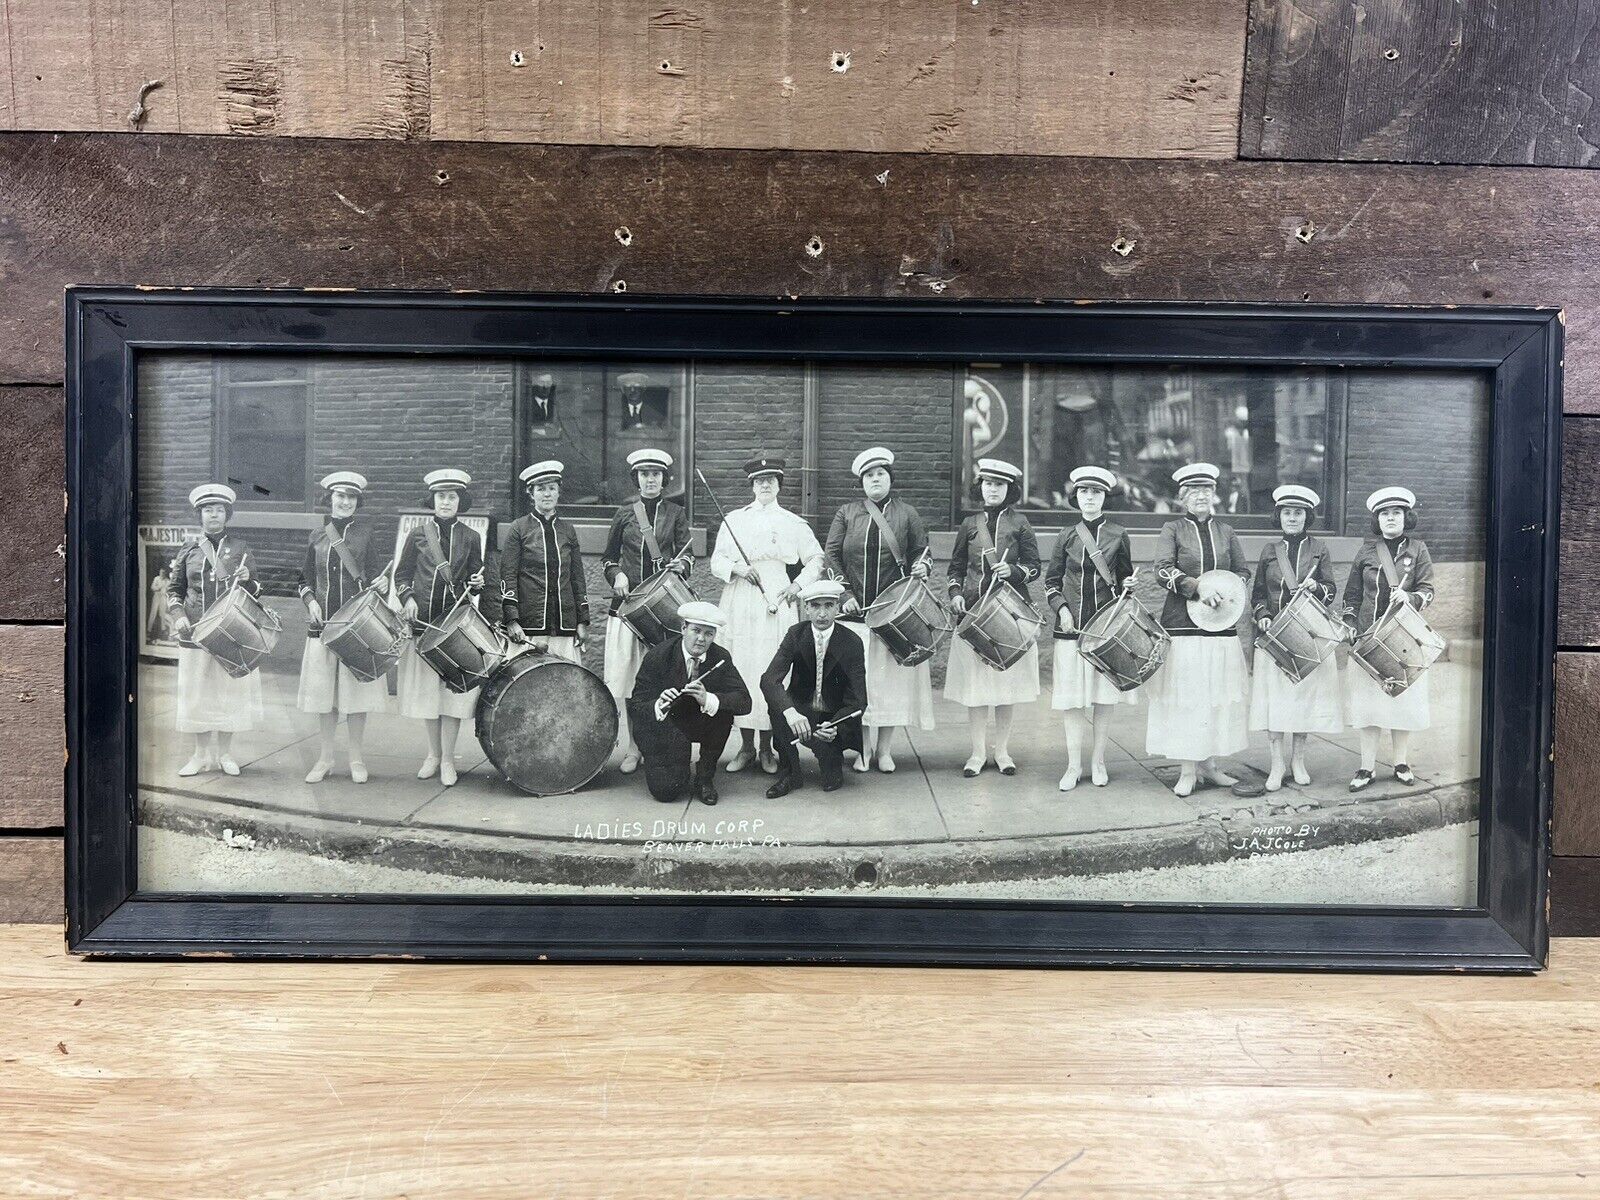 Vintage Framed Photo Ladies Drum Corp Beaver Falls, PA By J.A.J Cole